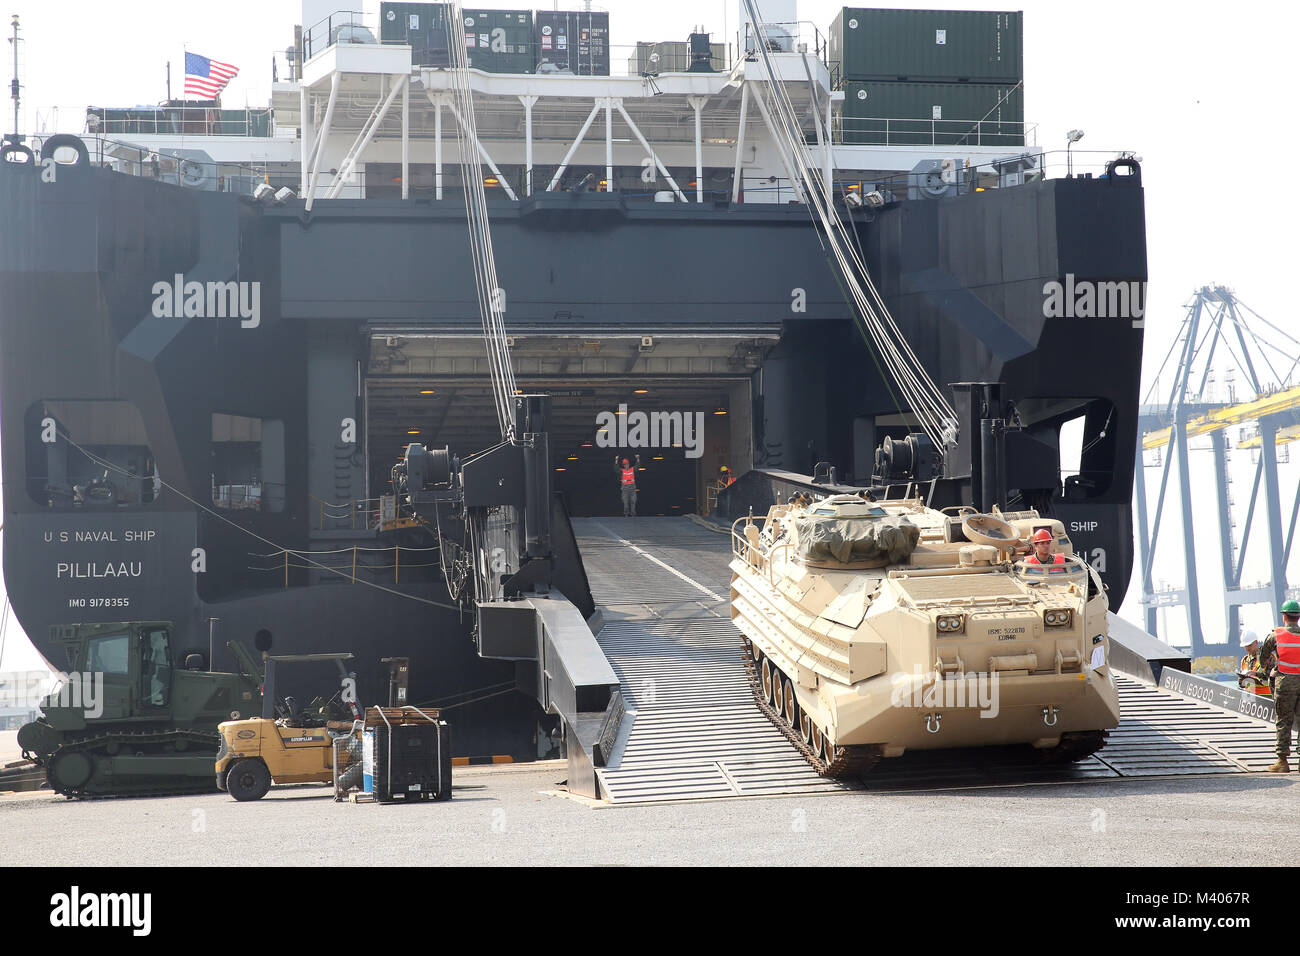 180206-N-IX266-009 LAEM CHABANG, Thailand— An amphibious assault vehicle rolls off the ramp of Military Sealift Command’s (MSC) large, medium-speed, roll-on/roll-off ship USNS Pililaau (T-AK 304) during an offload at the port here to deliver equipment in support of Cobra Gold 2018, Feb. 5. The USNS Pililaau is part of Maritime Prepositioning Ships Squadron THREE, which consists of a fleet of government-owned ships operated by MSC and is based in the Guam-Saipan area of the Western Pacific Ocean. CG18 is a Thailand and United States co-sponsored exercise conducted annually in the Kingdom of Tha Stock Photo